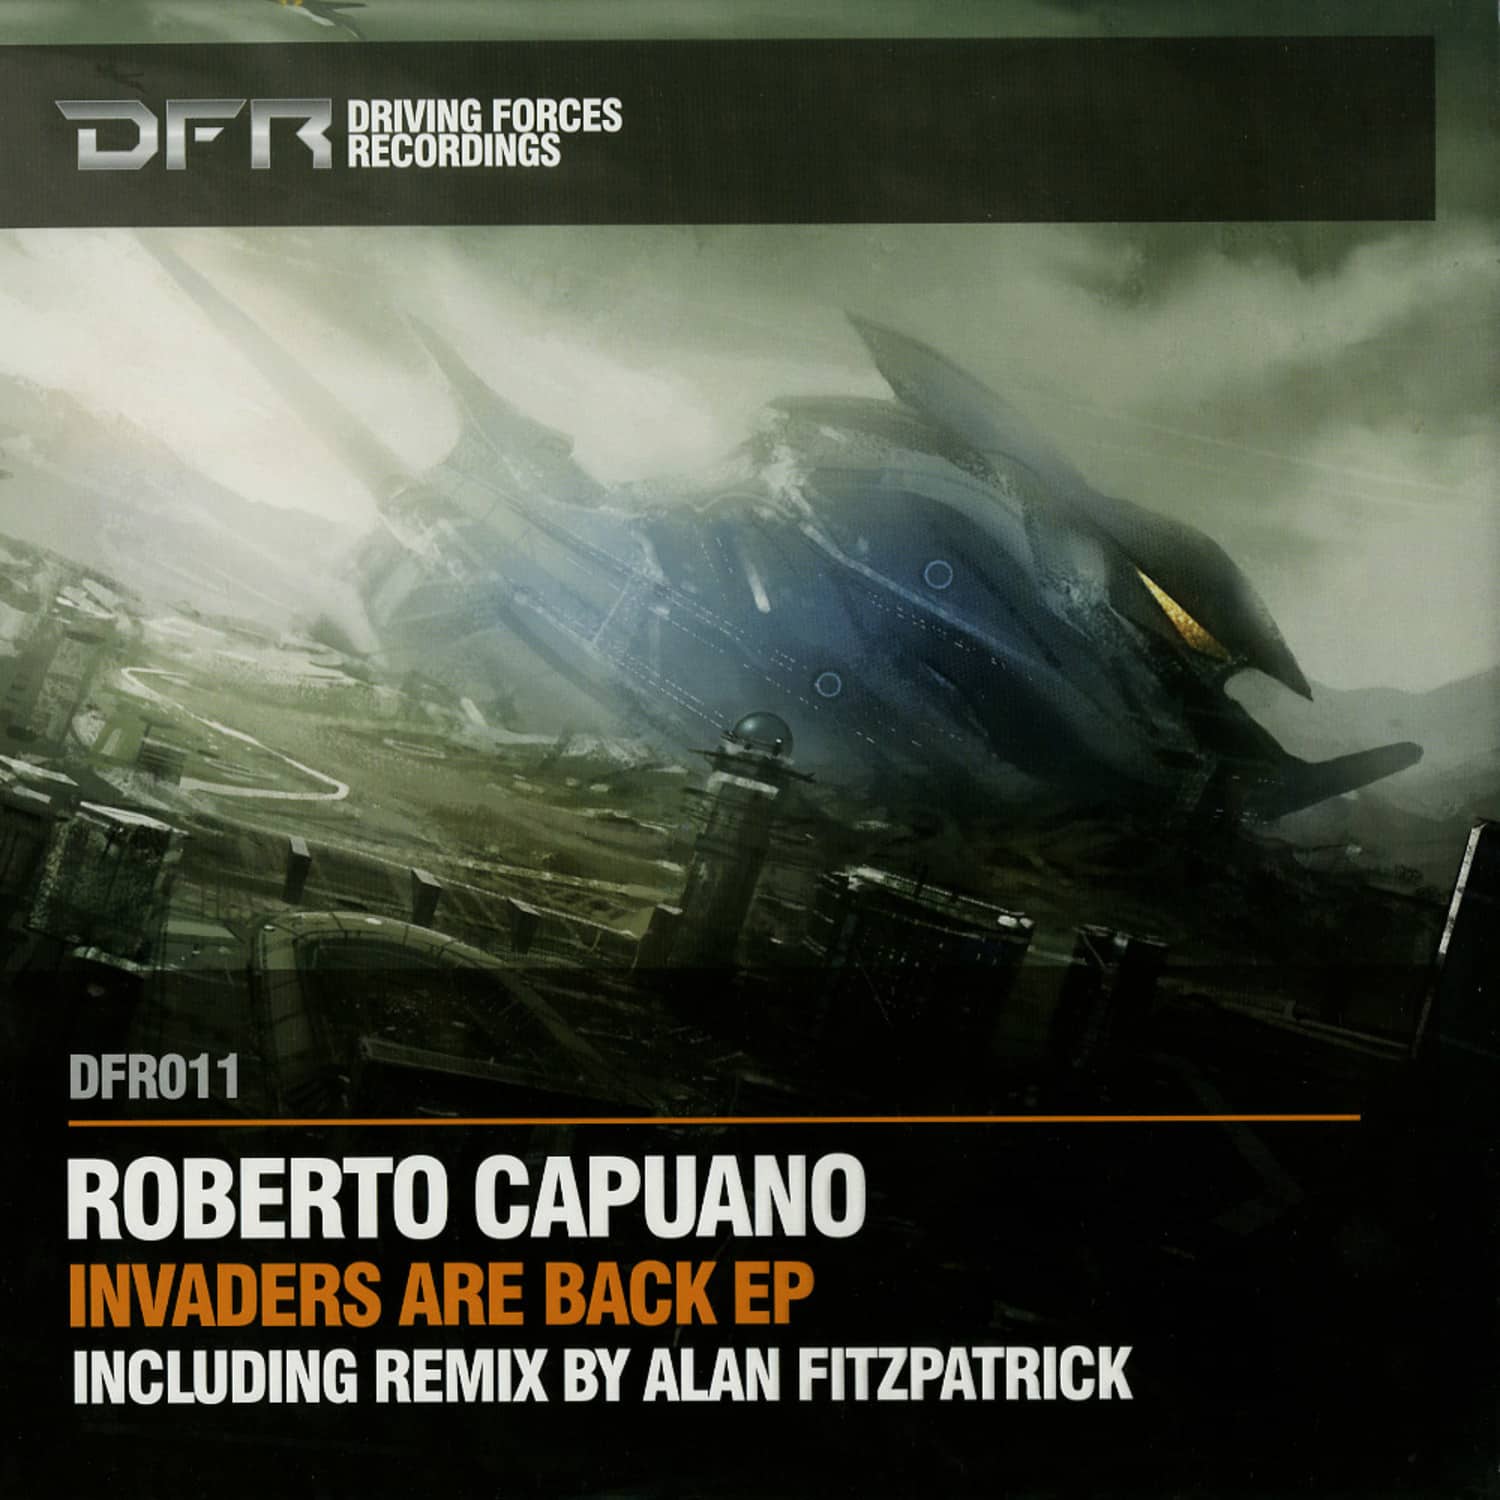 Roberto Capuano - INVADERS ARE BACK EP / ALAN FITZPATRICK RMX